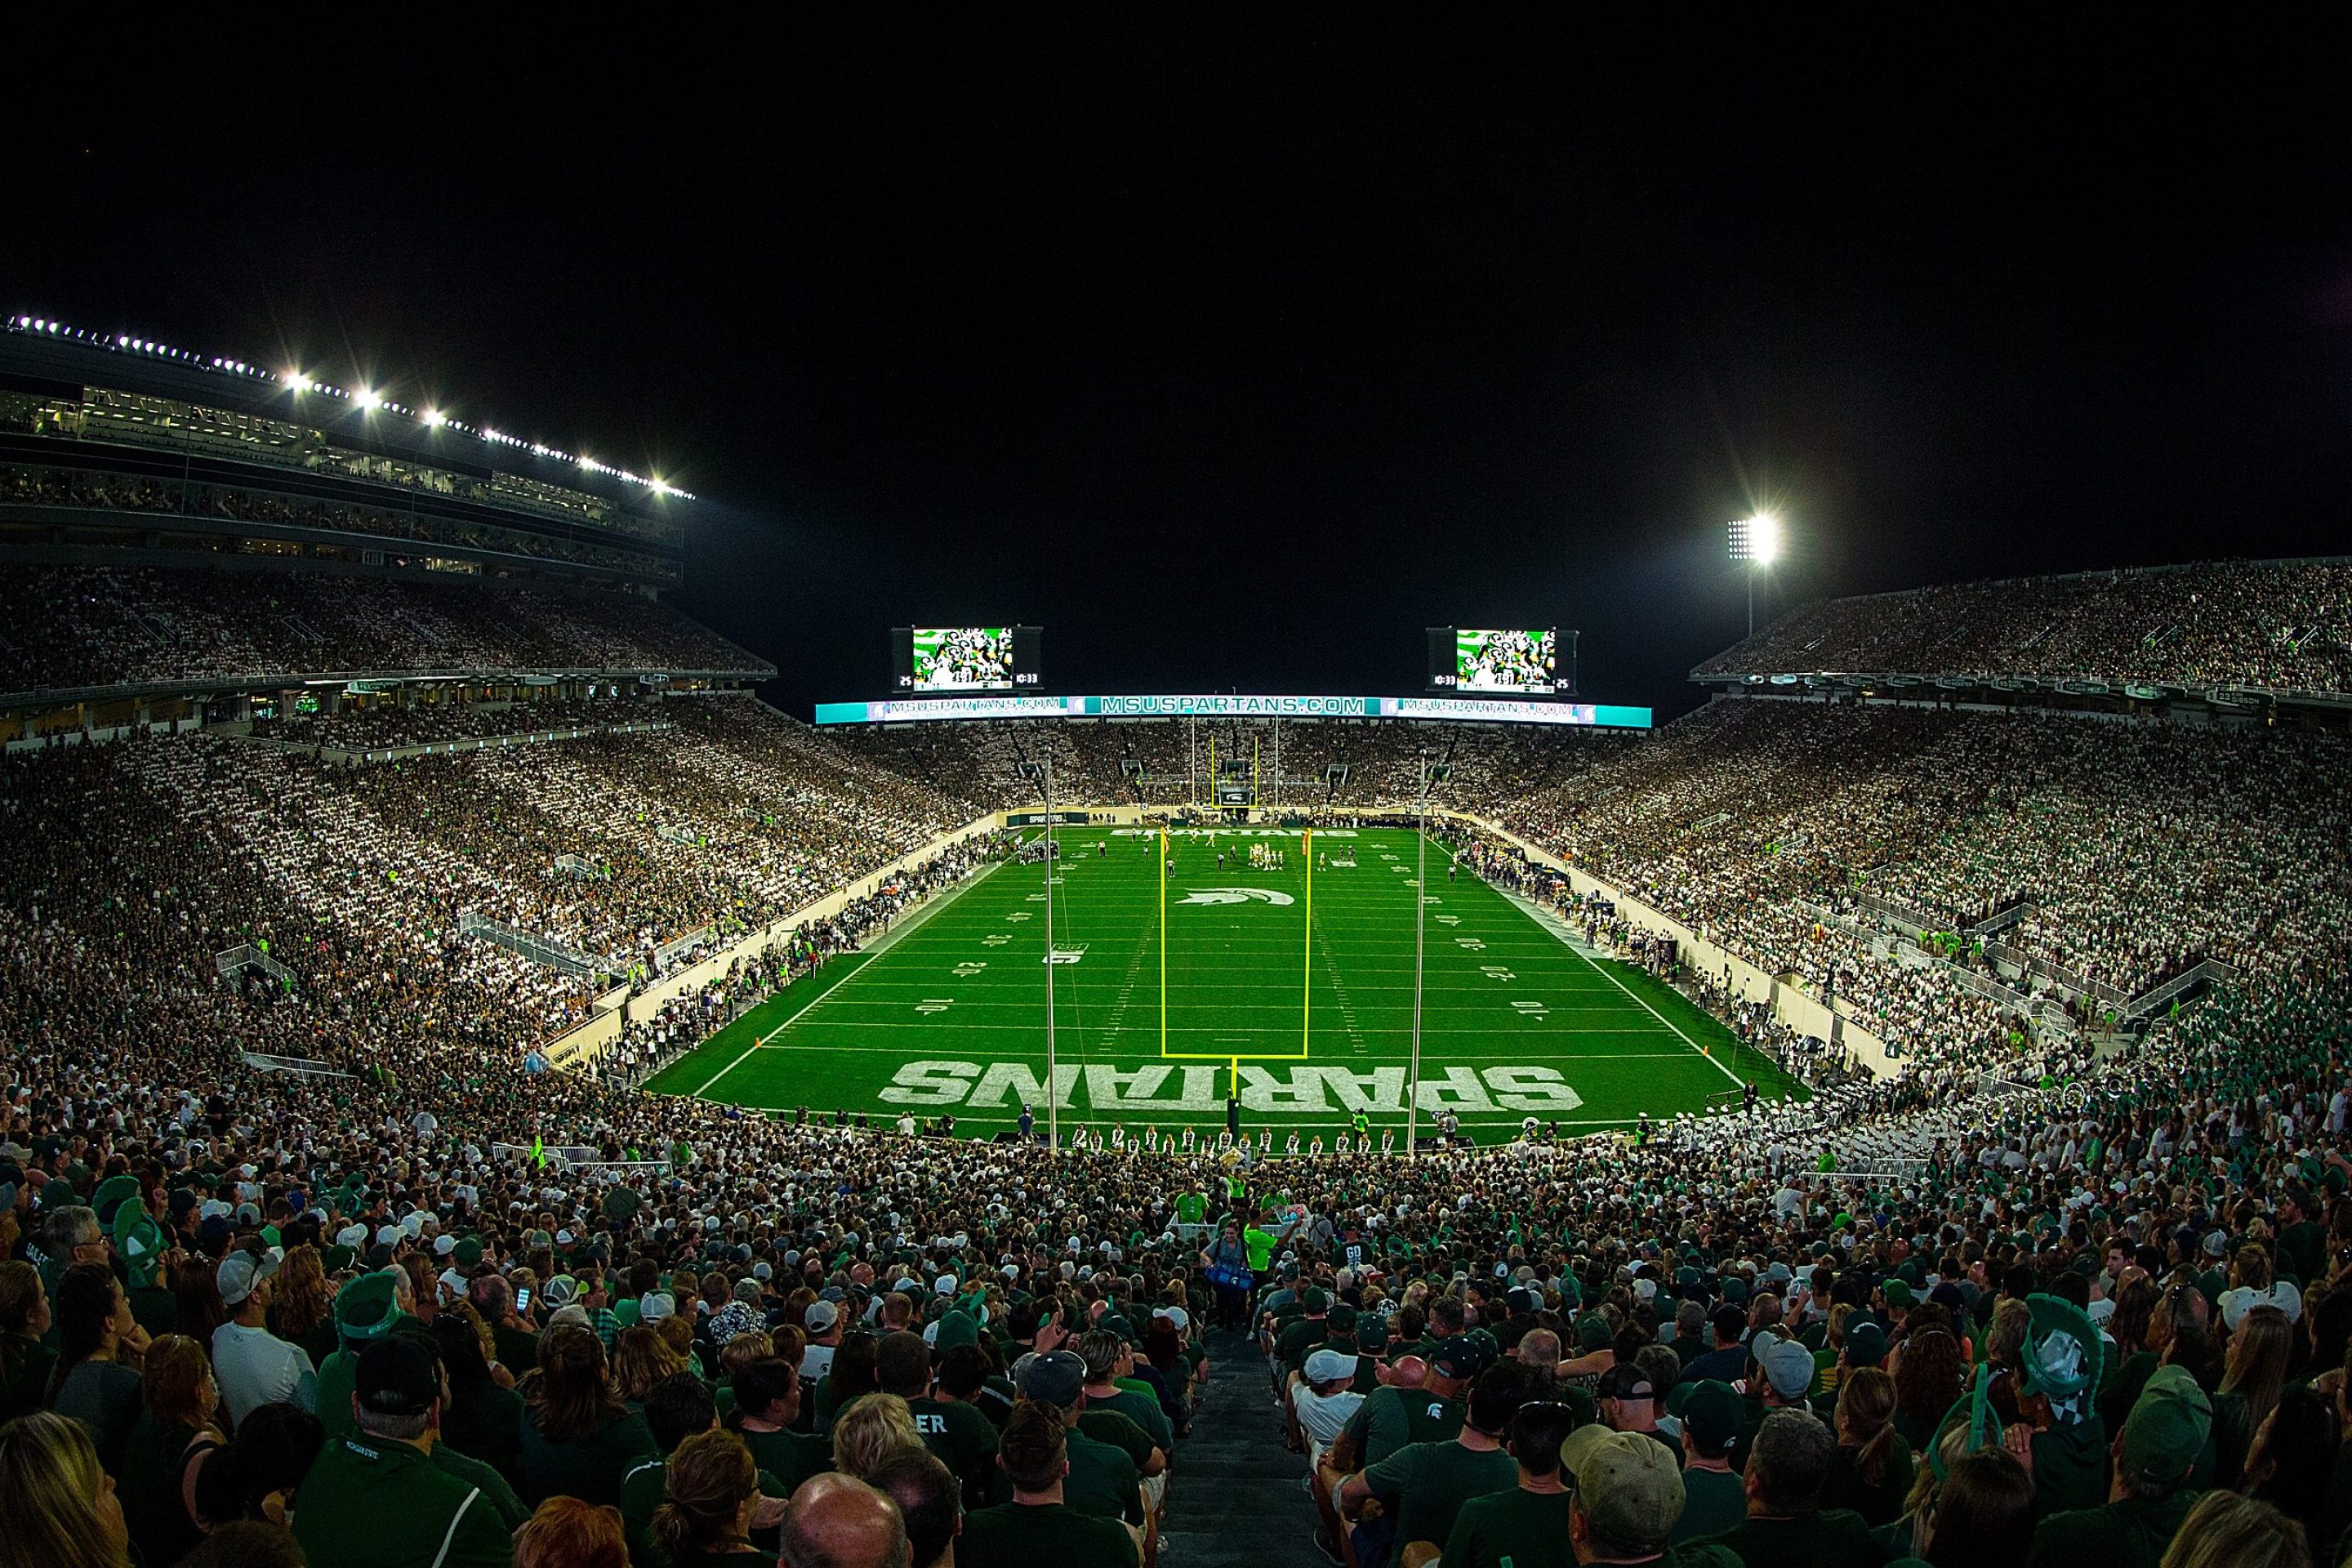 A general view of Spartan Stadium during the game between Notre Dame and Michigan State Spartans on September 23, 2017 in East Lansing, Michigan. The stadium is packed.